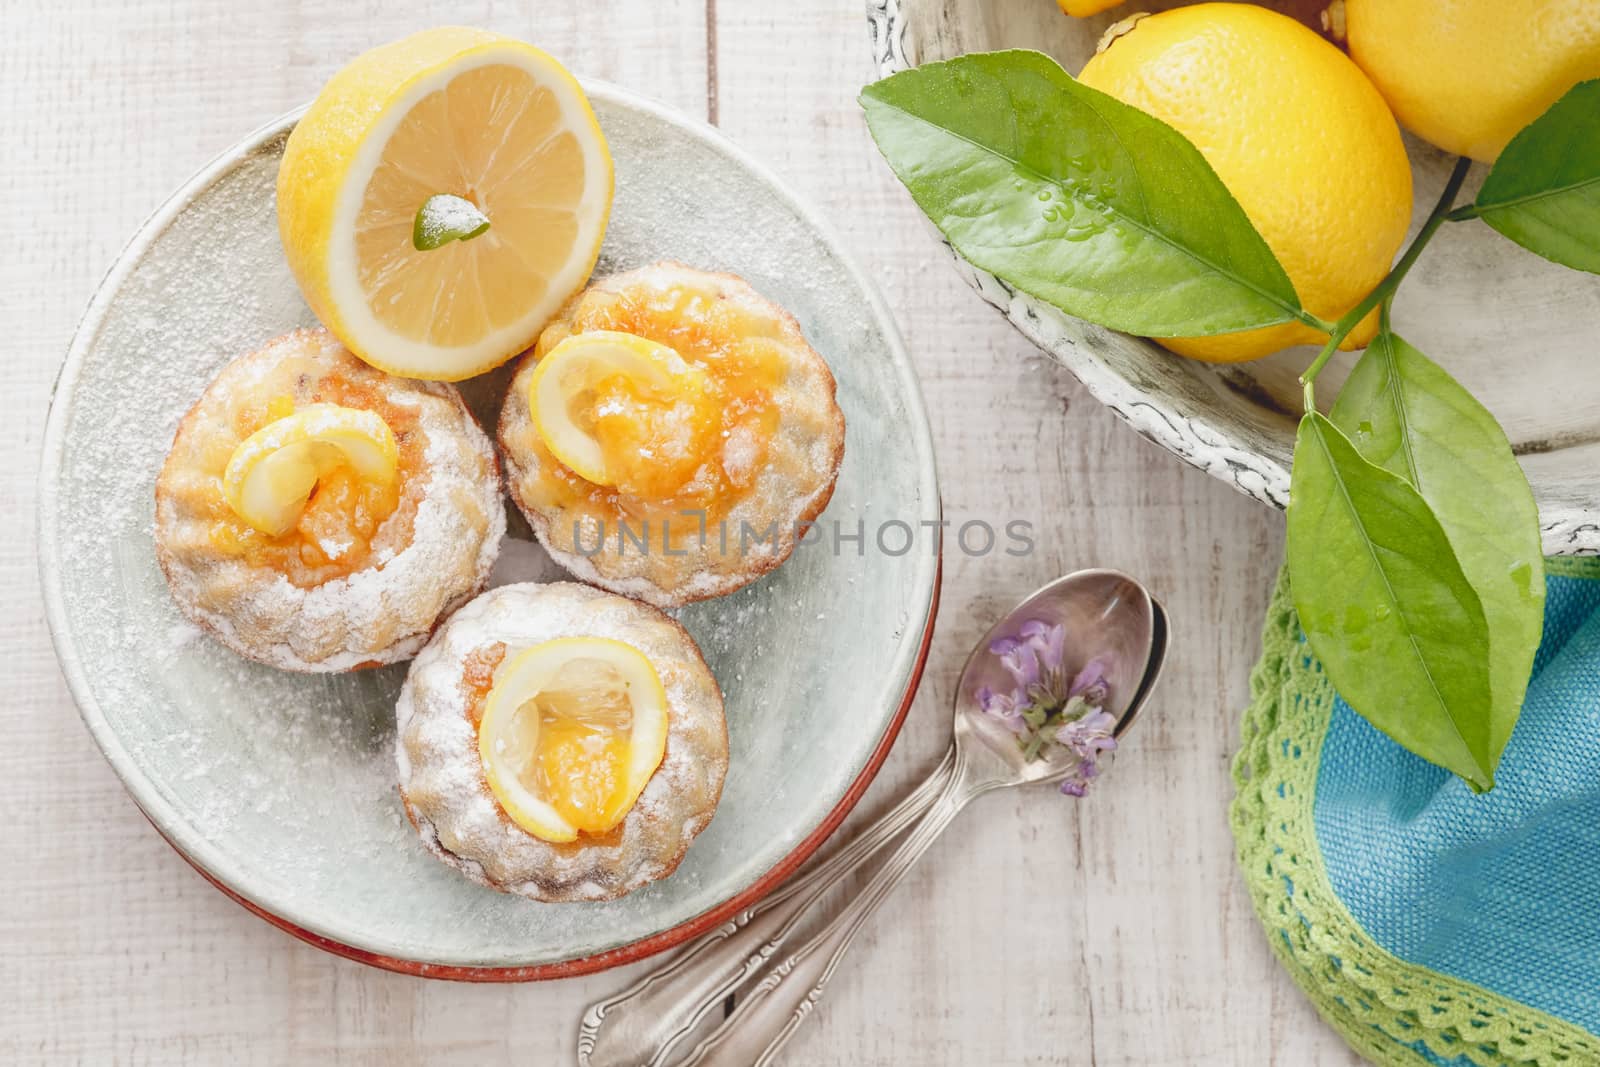 Mini lemon bundt cakes dusted with icing sugar and fresh lemons over rustic wooden background. Macro, selective focus. Natural light